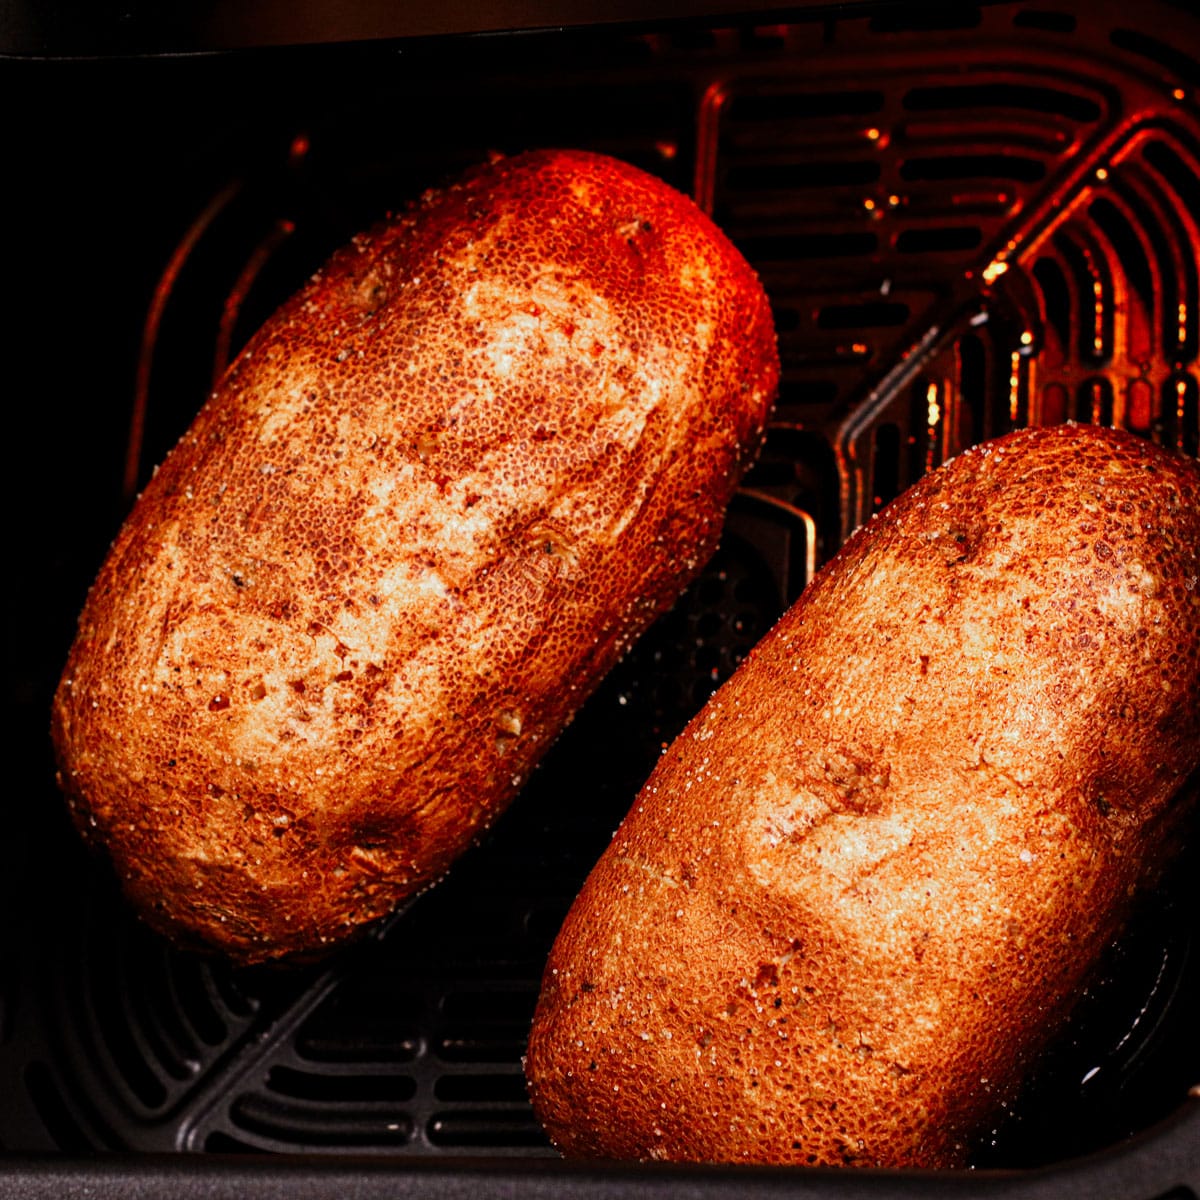 Cooking baked potatoes in air fryer